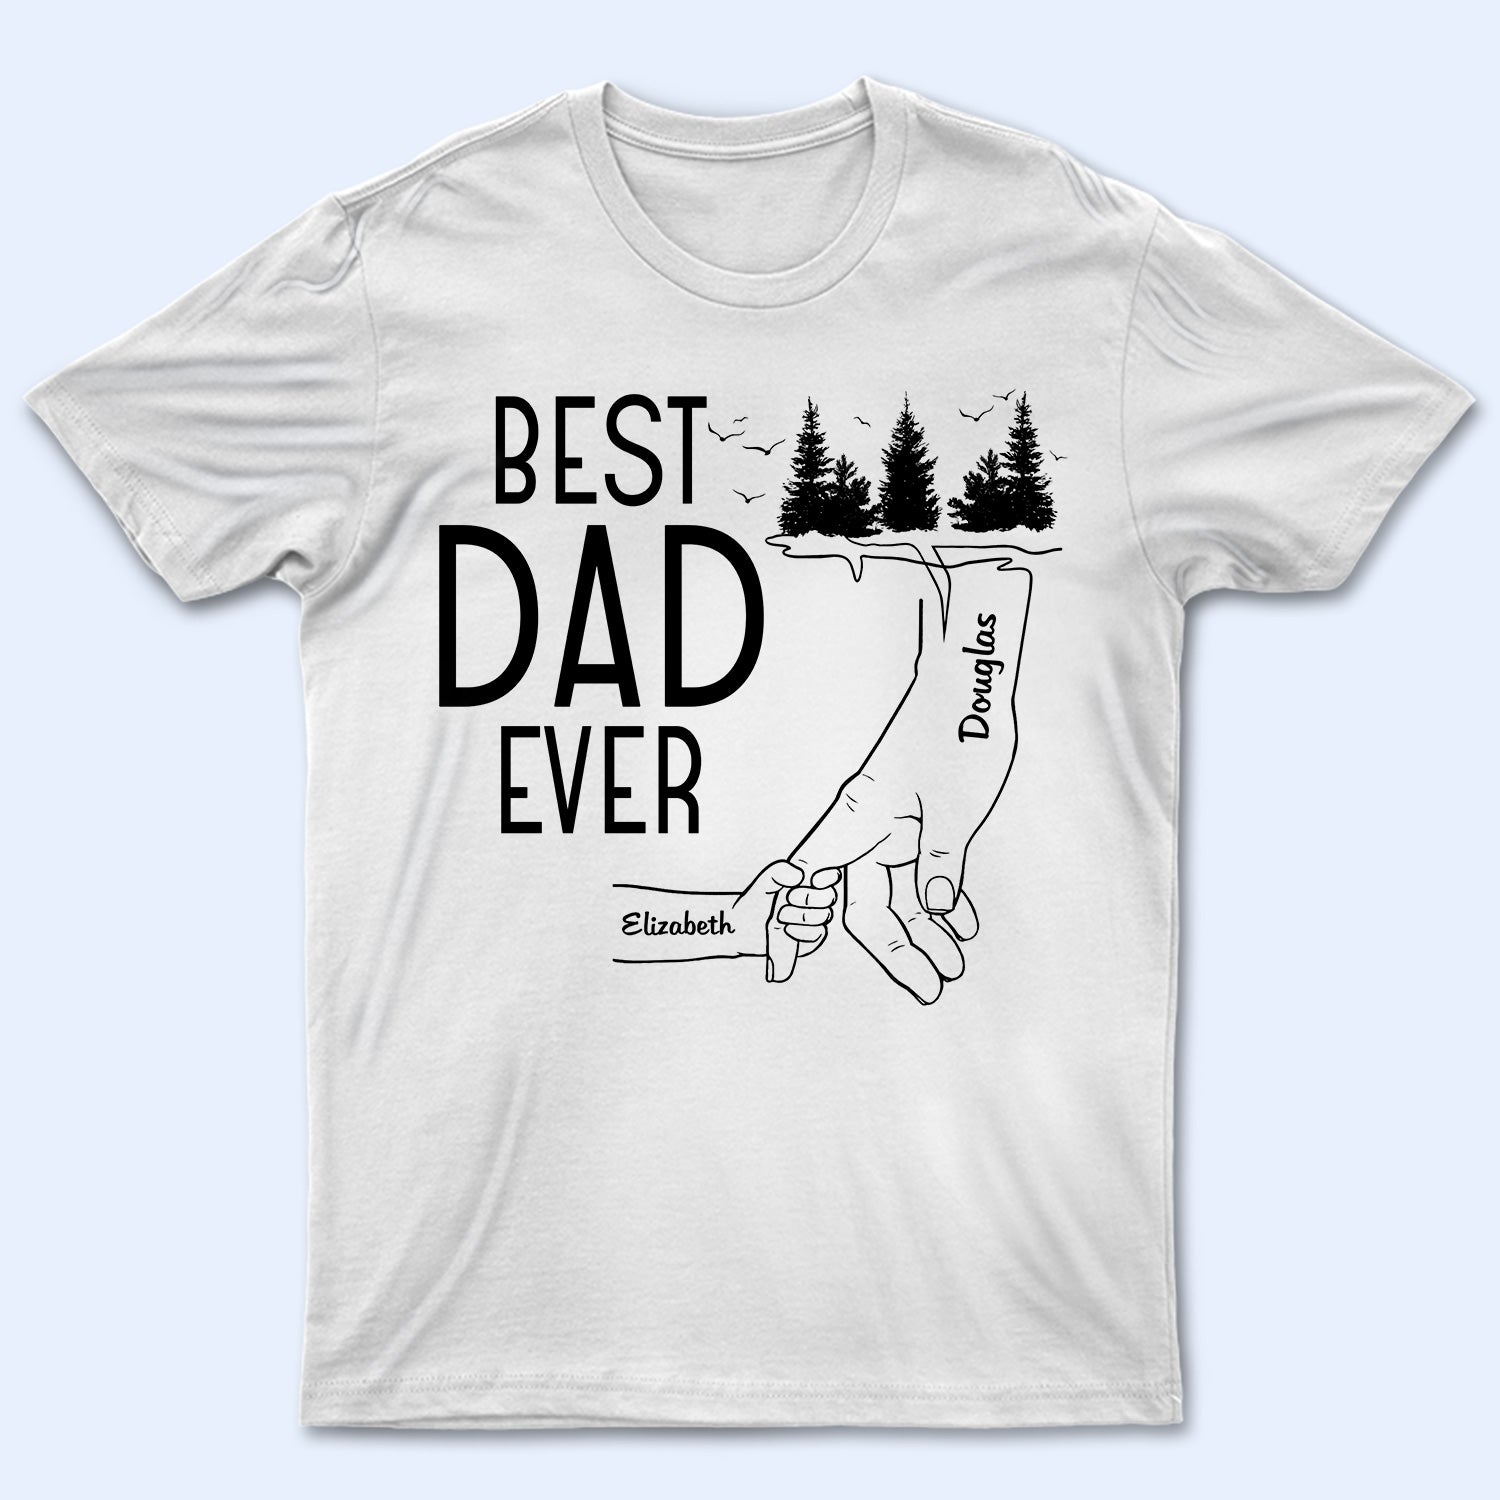 Best Dad Ever - Birthday, Loving Gift For Daddy, Papa, Father, Grandpa, Grandfather - Personalized Custom T Shirt